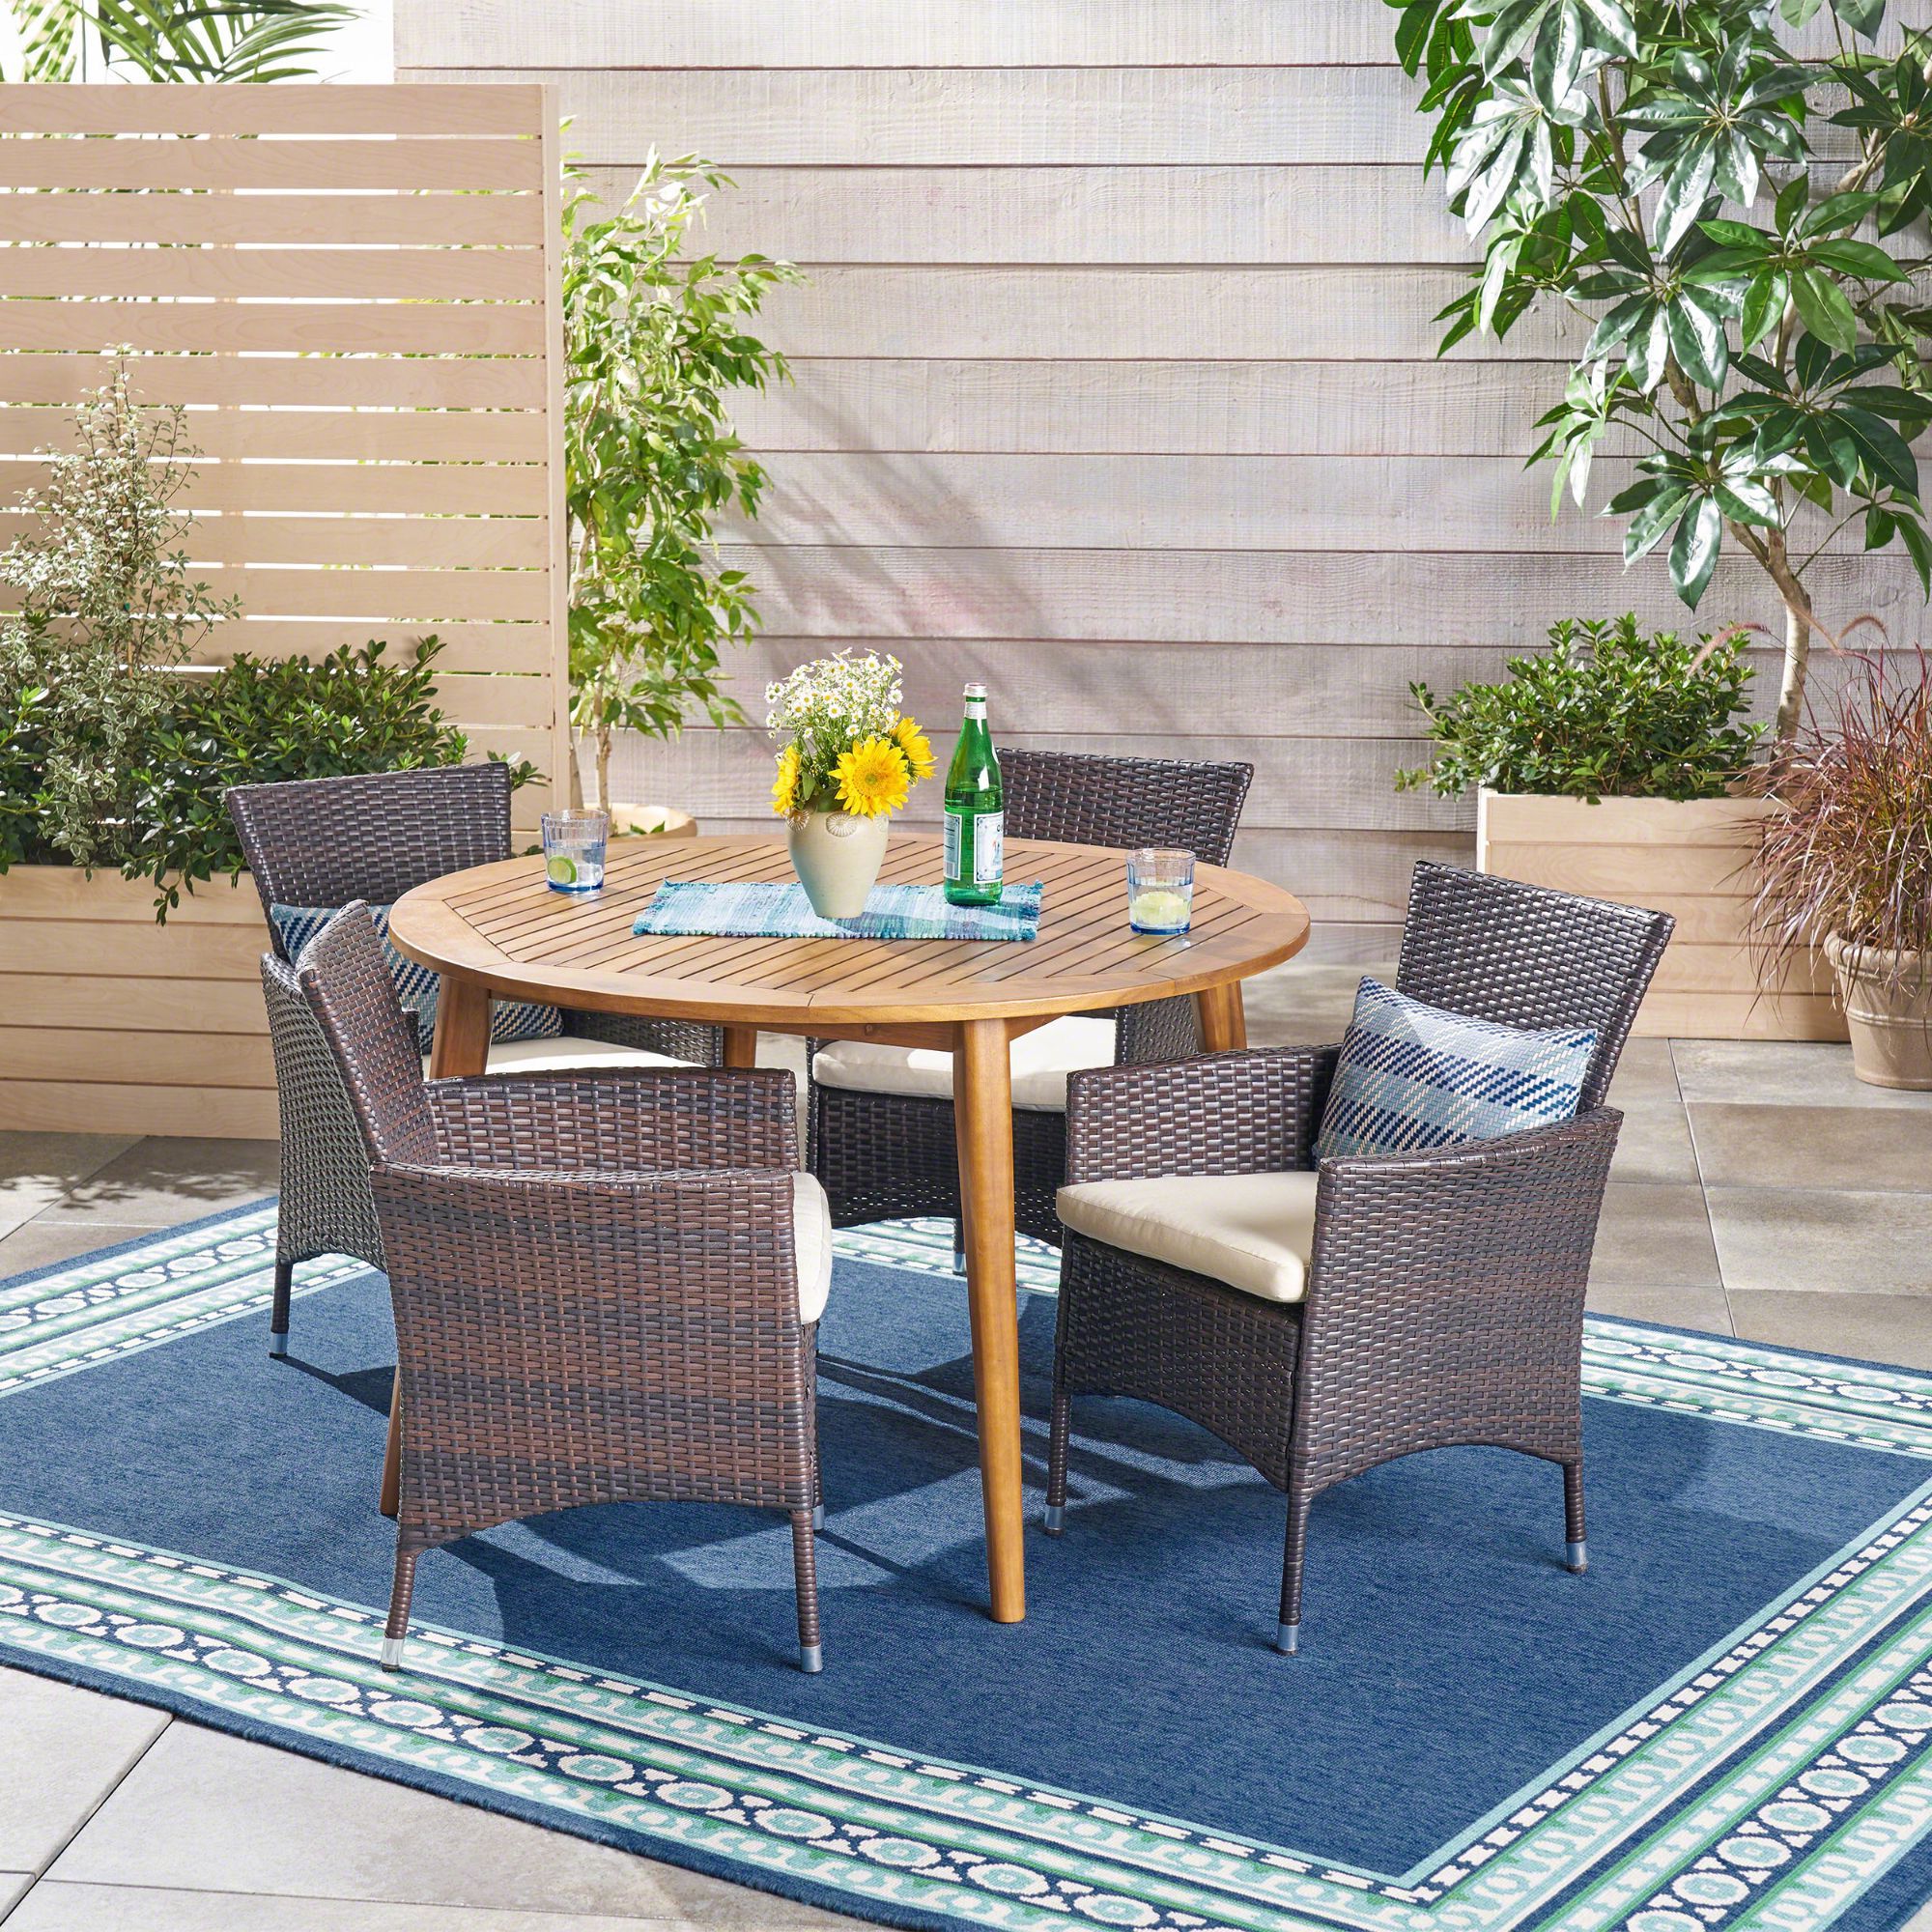 Round 5 Piece Outdoor Patio Dining Sets Inside Well Liked 5 Piece Brown Wicker Finish Round Outdoor Furniture Patio Dining Set (View 3 of 15)